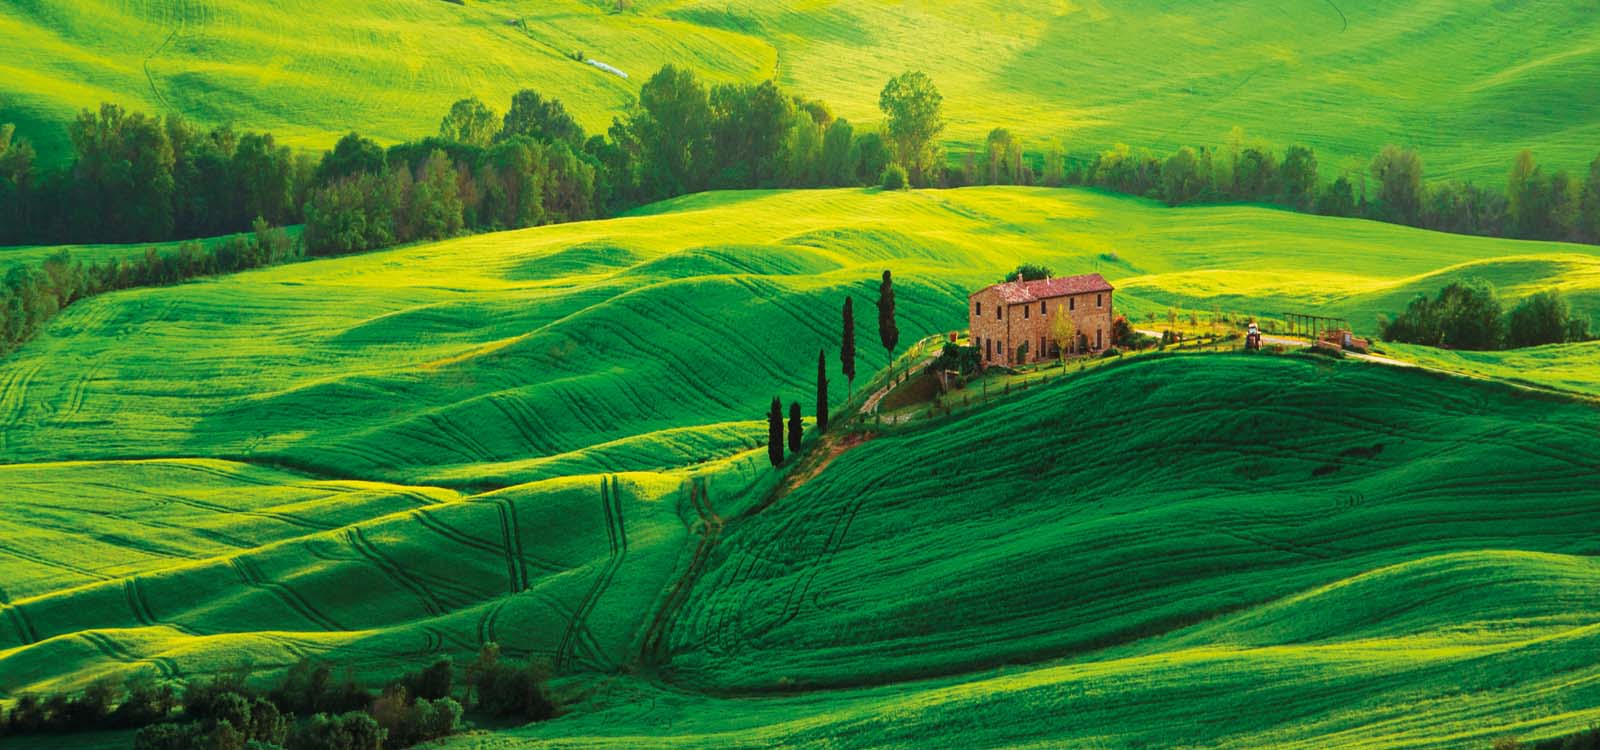 Hills and a farm in Tuscany.